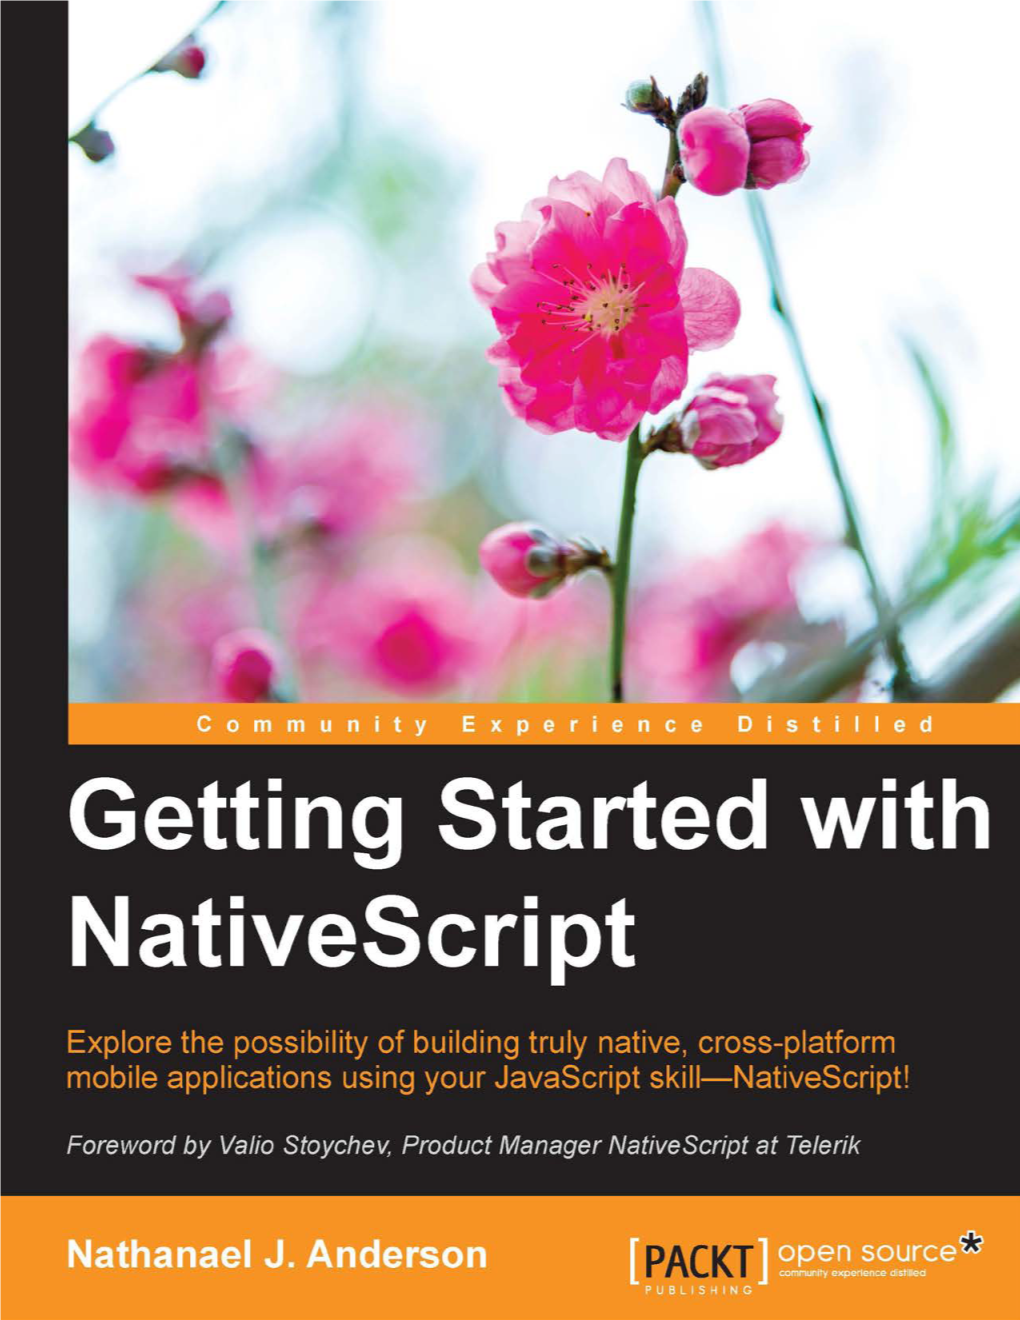 Geting Started with Nativescript: Explore the Possibility of Building